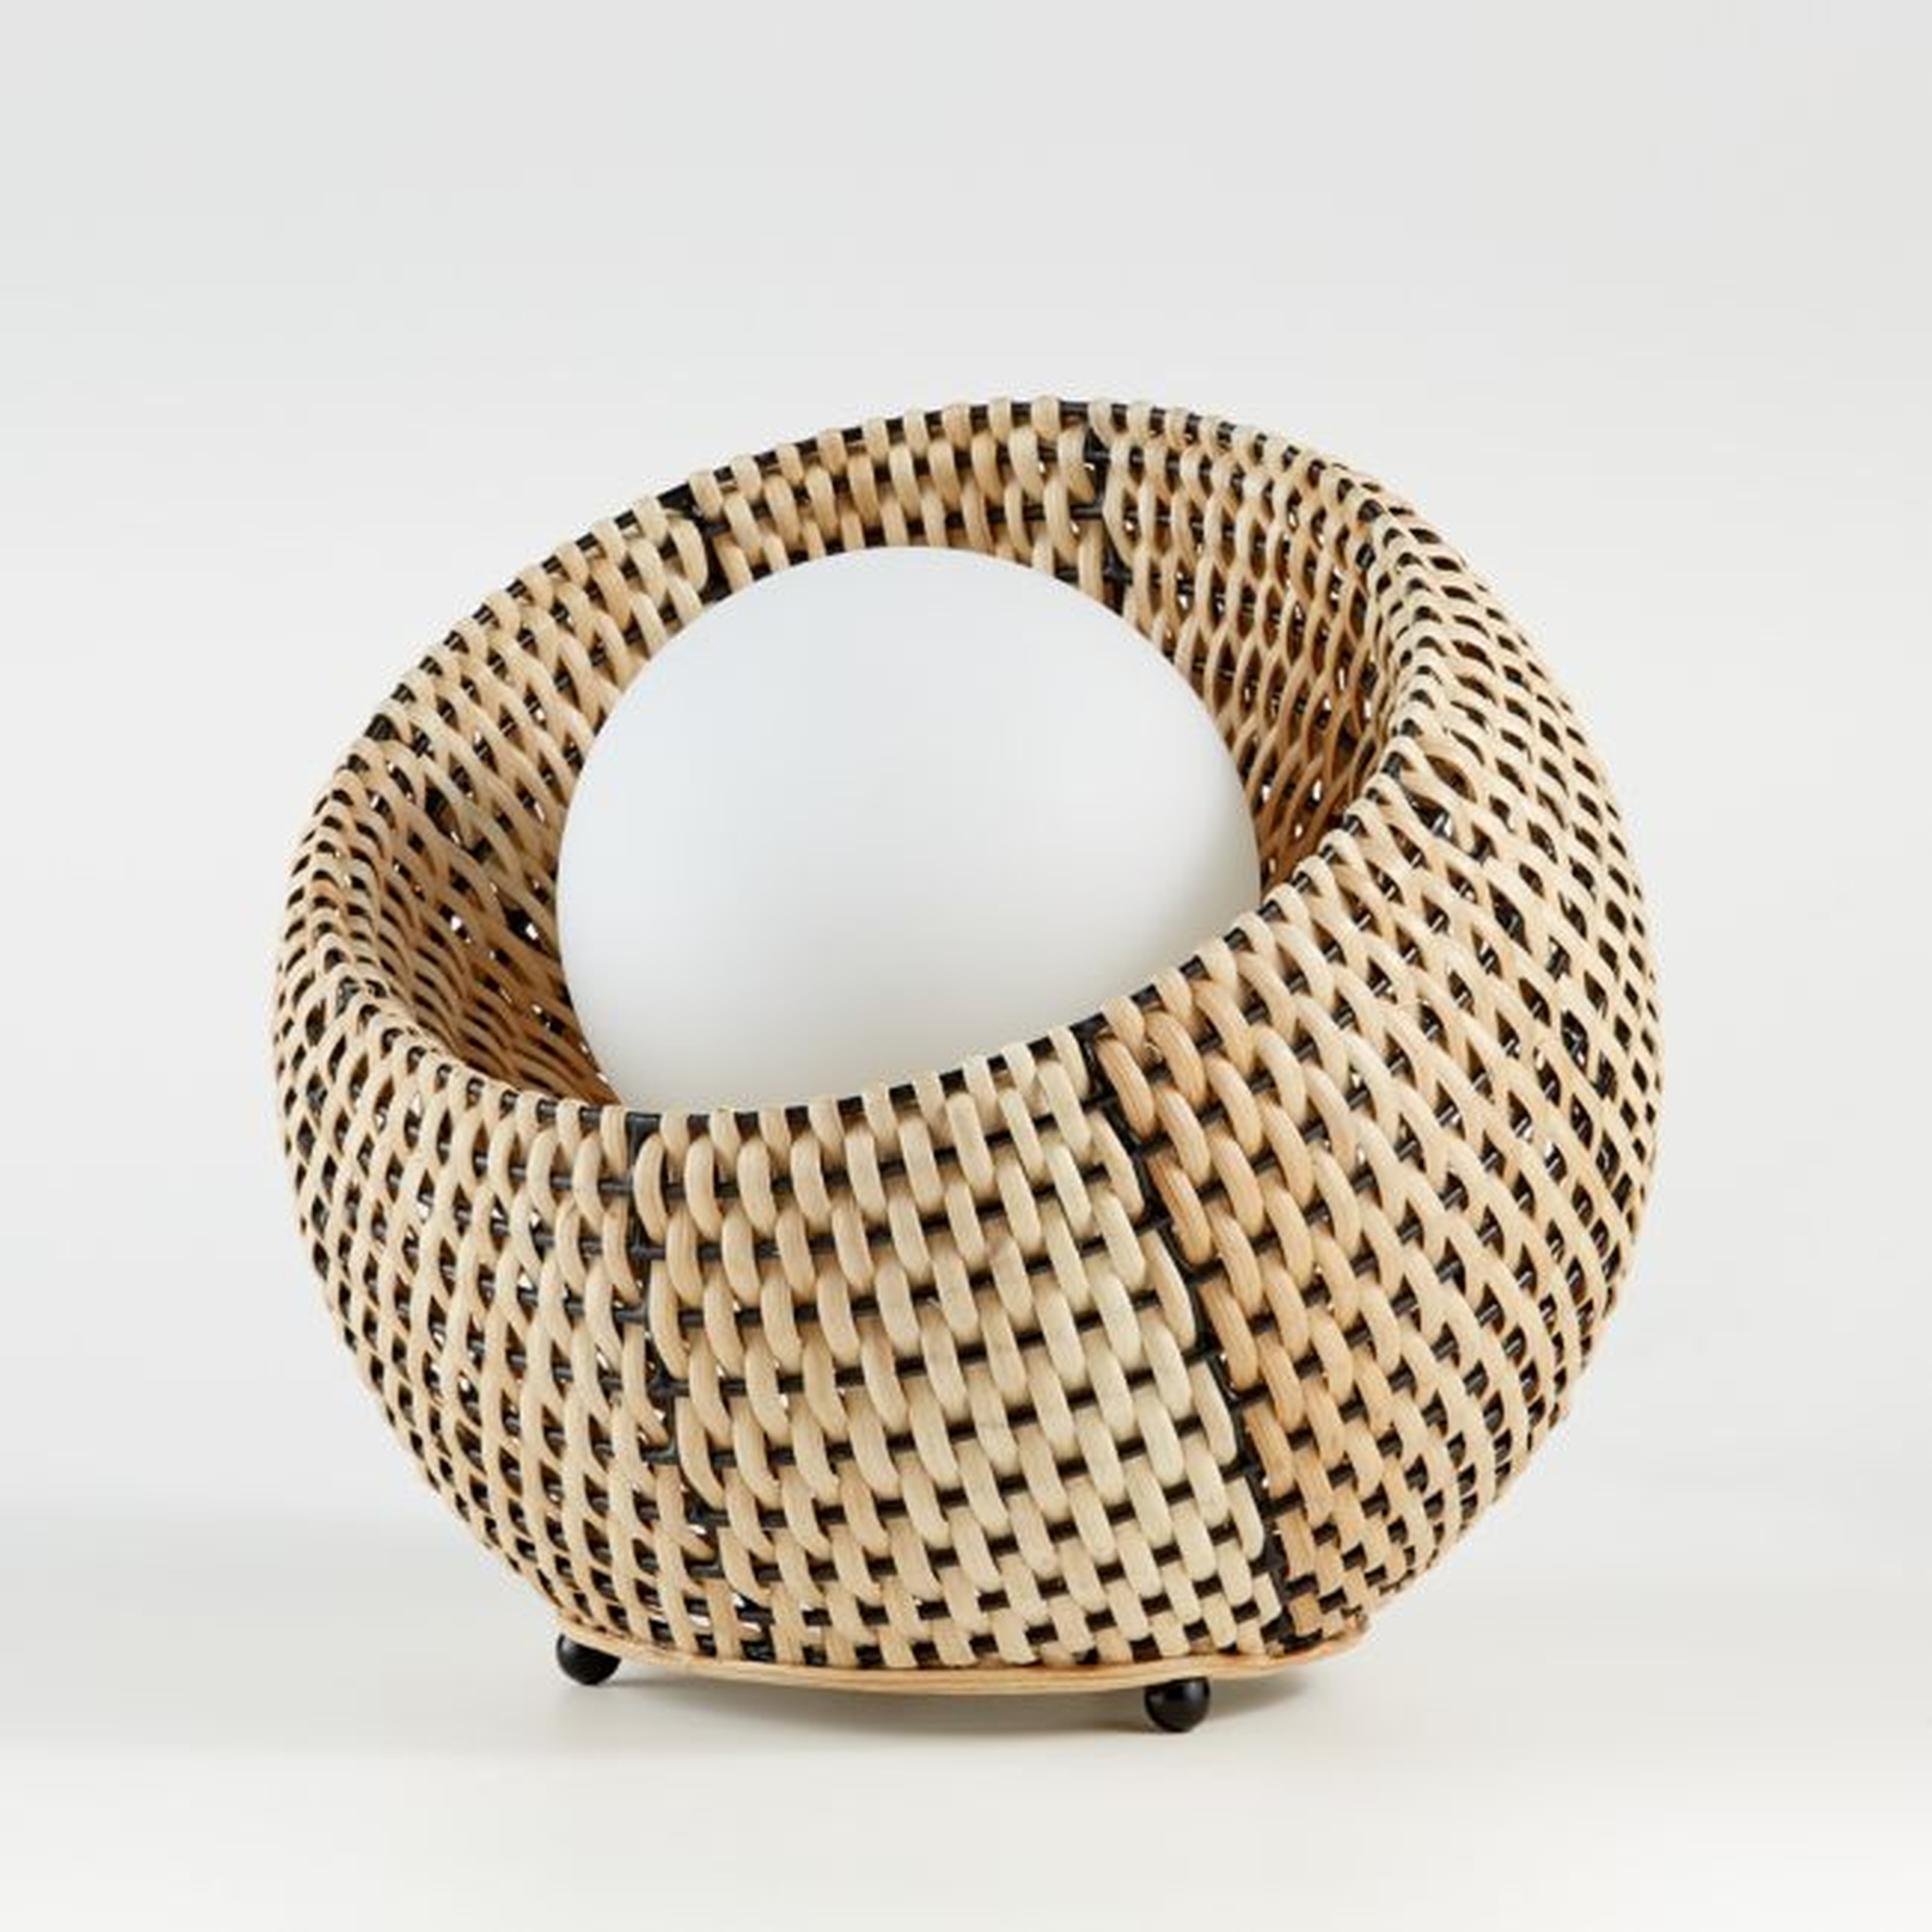 Rota Round Wicker Table Lamp - Crate and Barrel